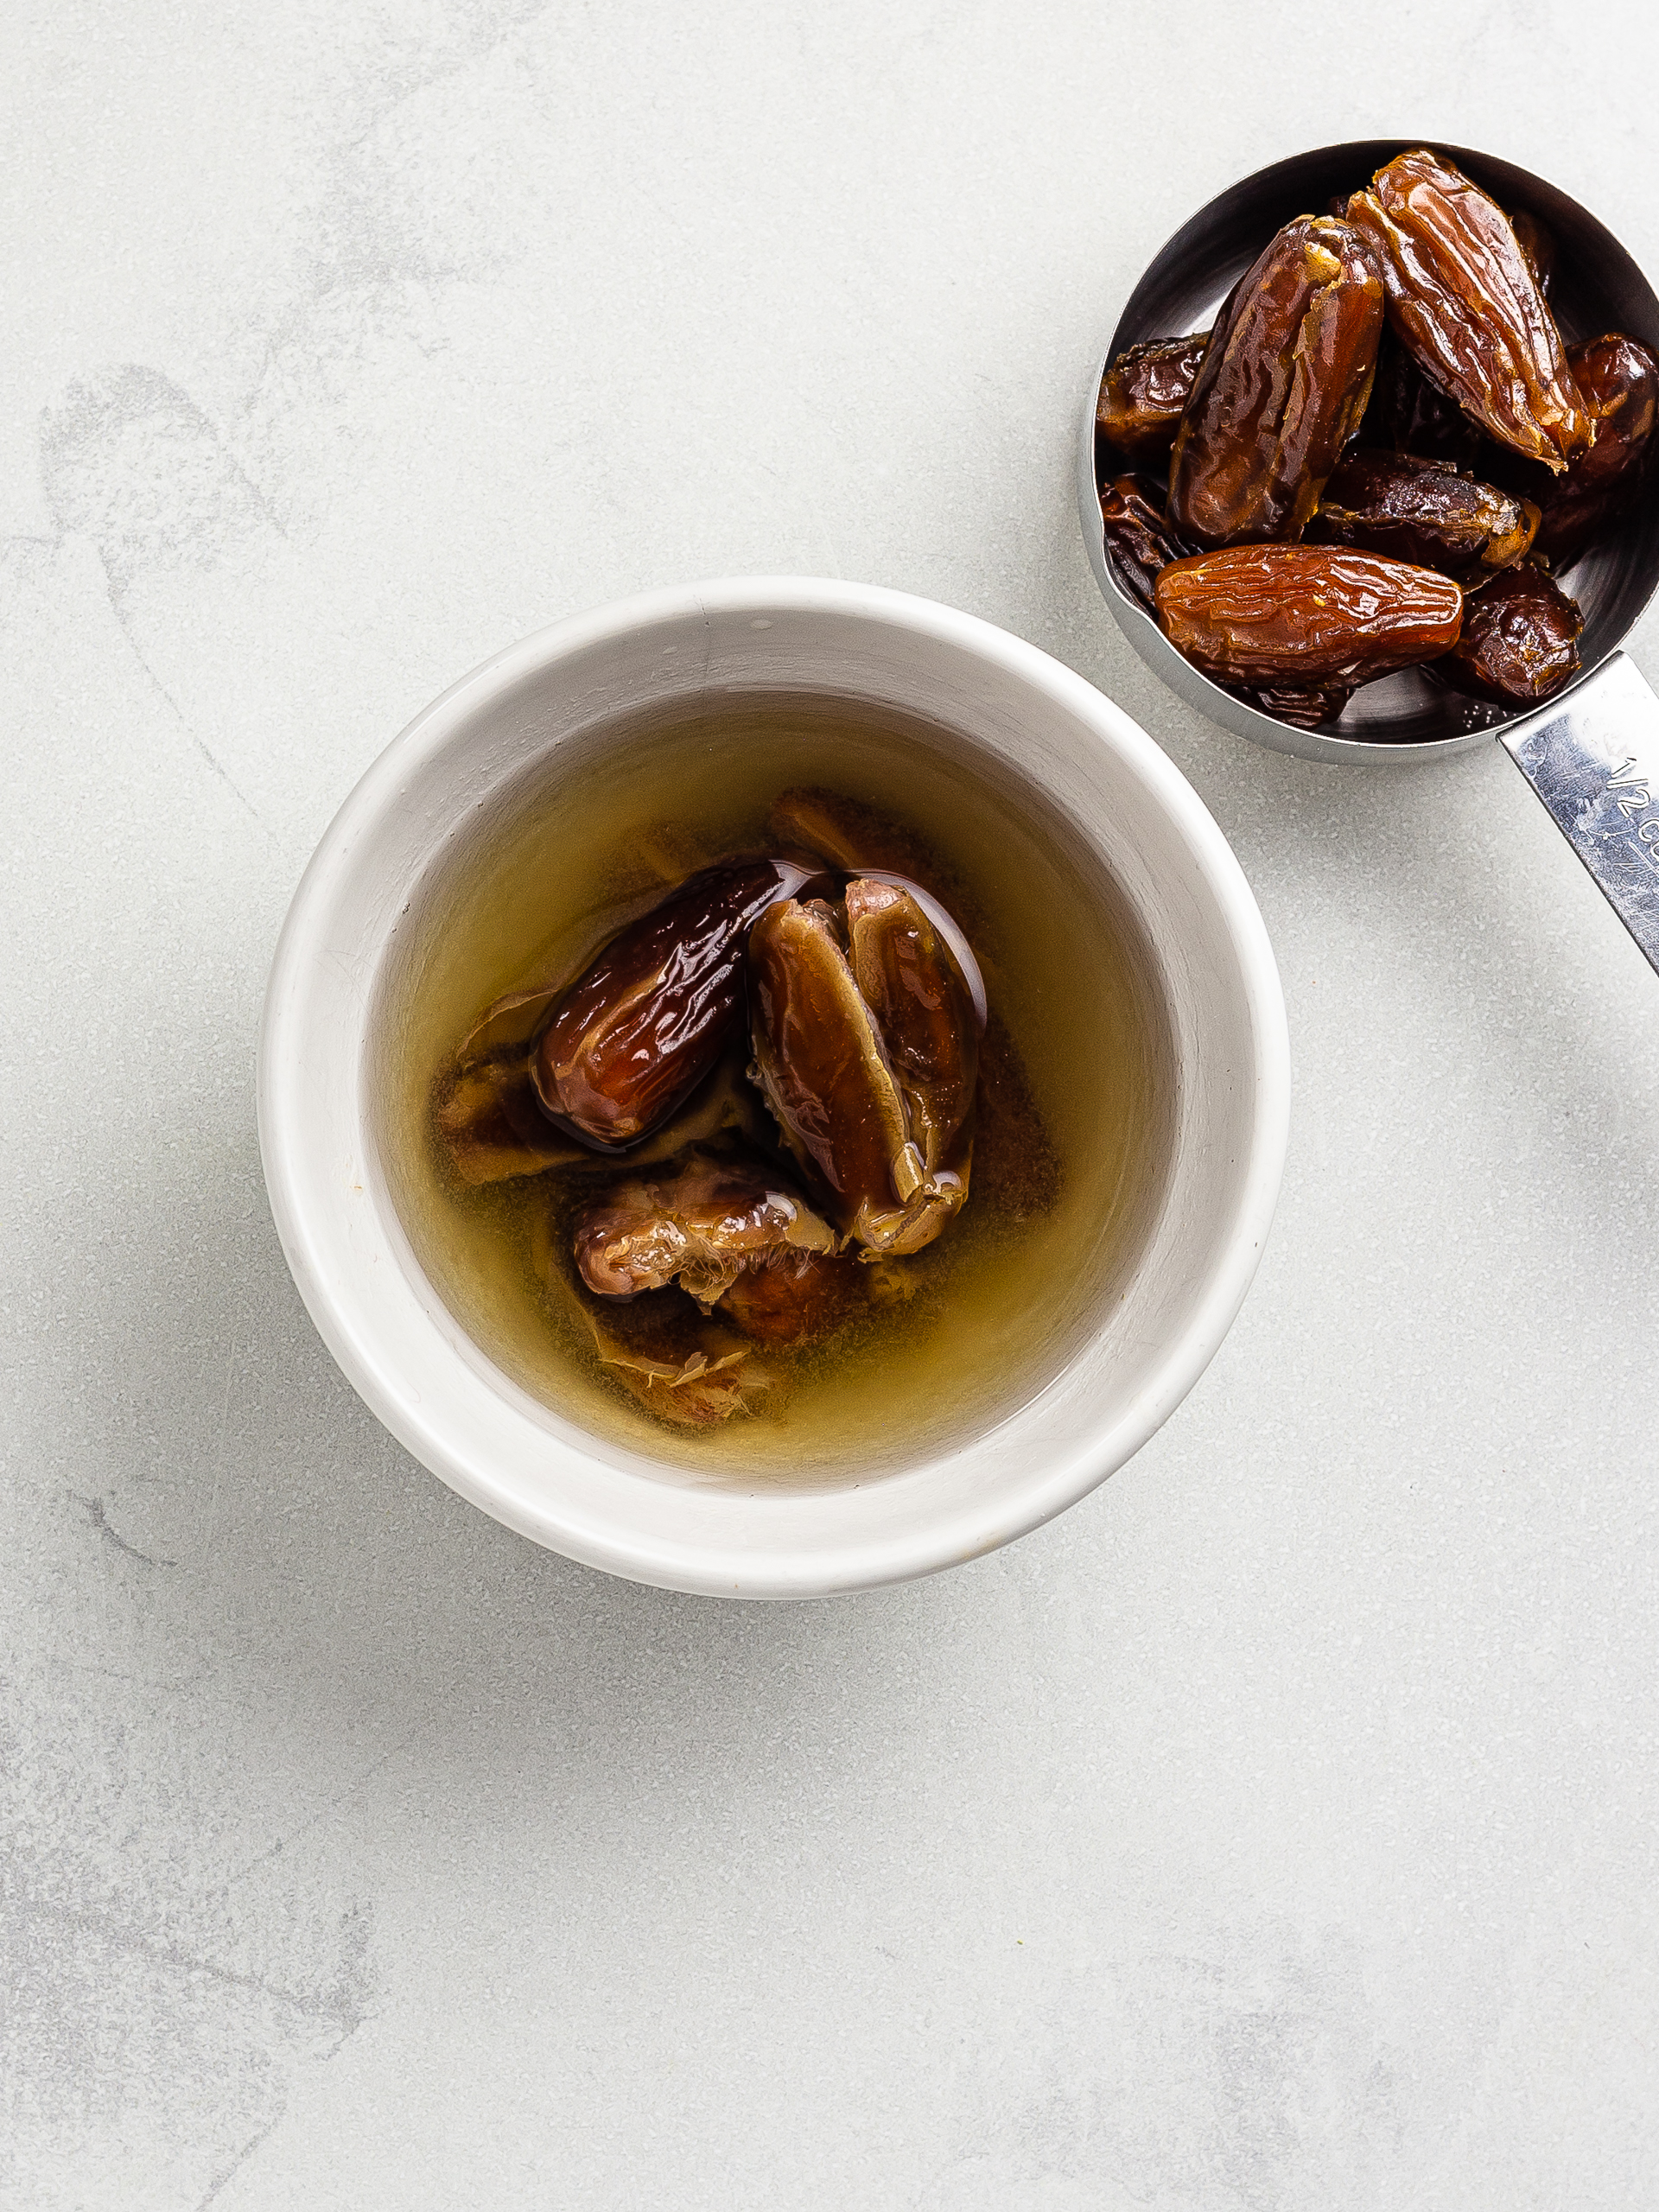 dates soaked in water